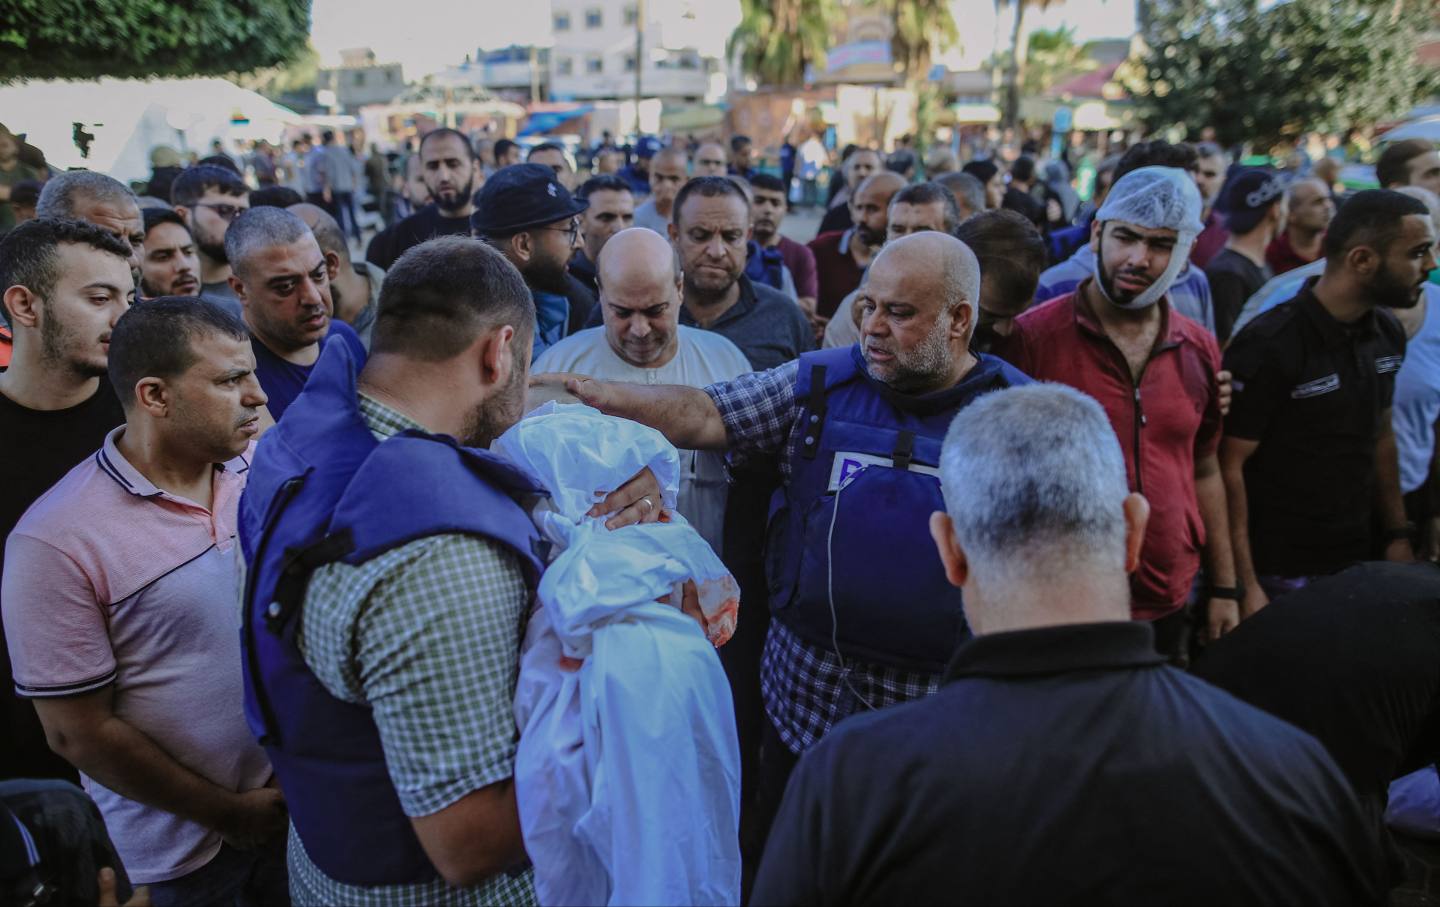 Al Jazeera correspondent Wael Al-Dahdouh bids a heart-wrenching farewell to his wife, son, and daughter during their funeral service in the heart of Gaza's Nuseirat camp.